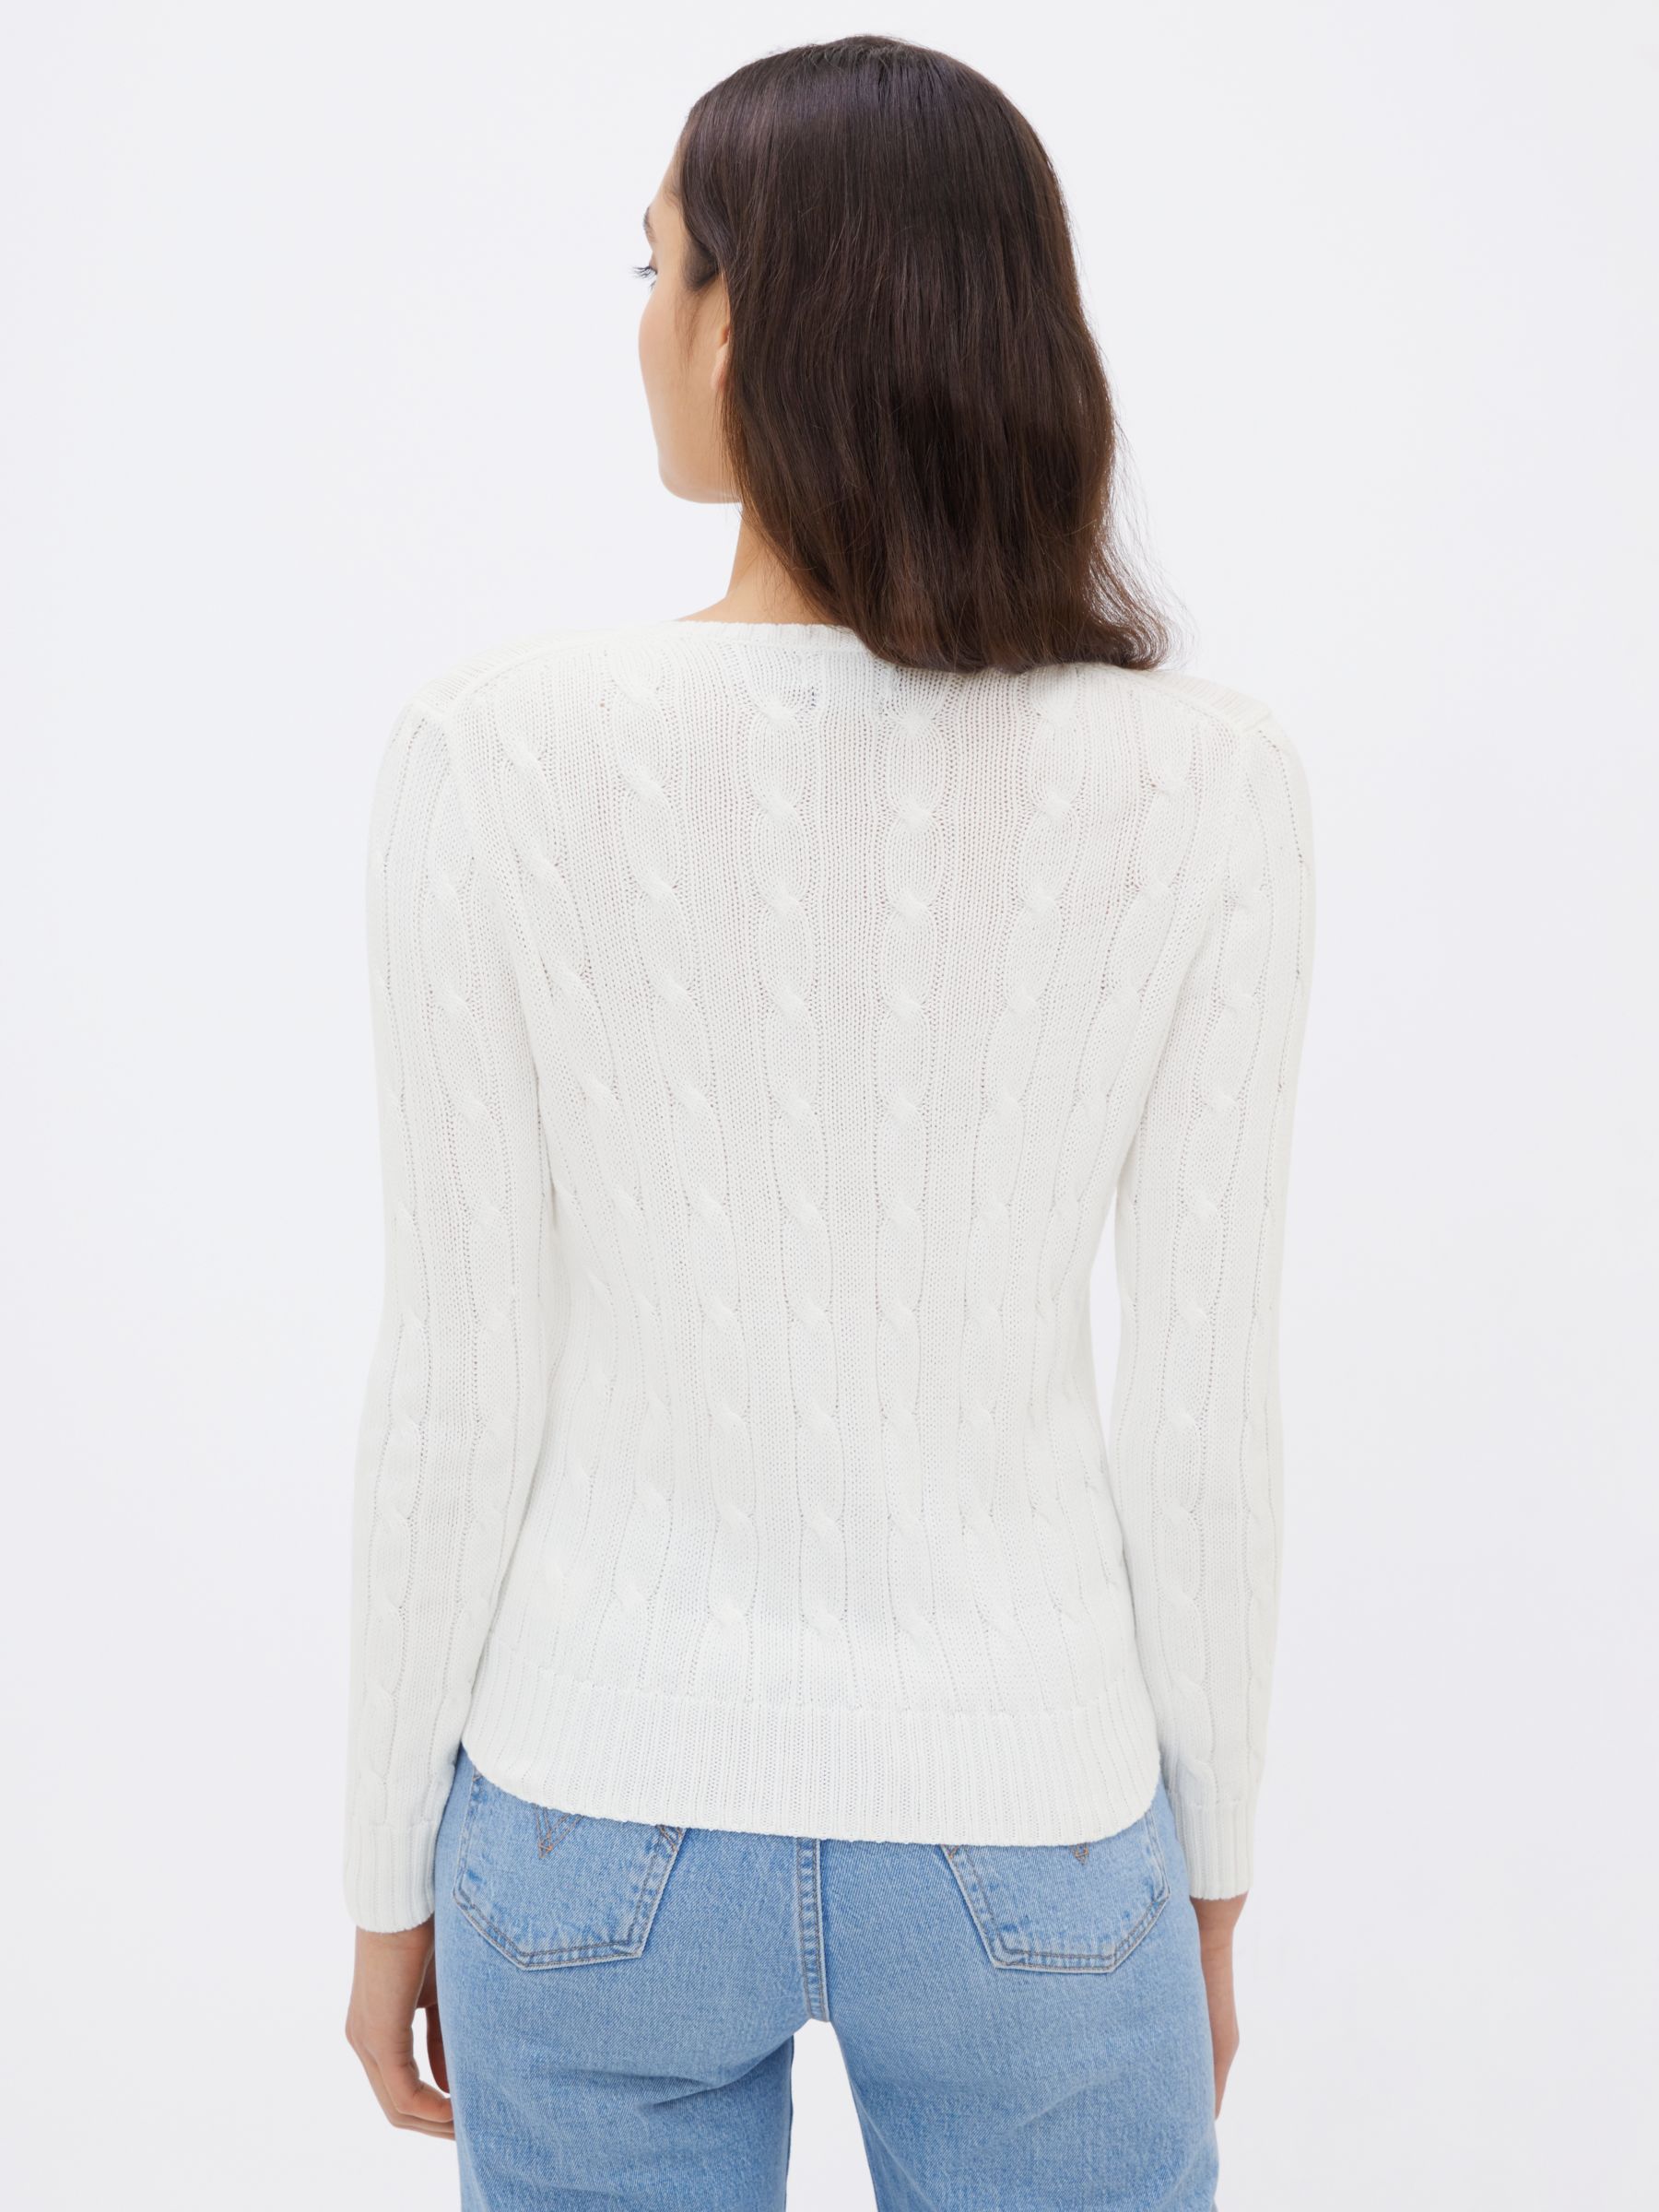 Polo Ralph Laure Kimberly V-Neck Cable Knit Jumper, White at John Lewis ...